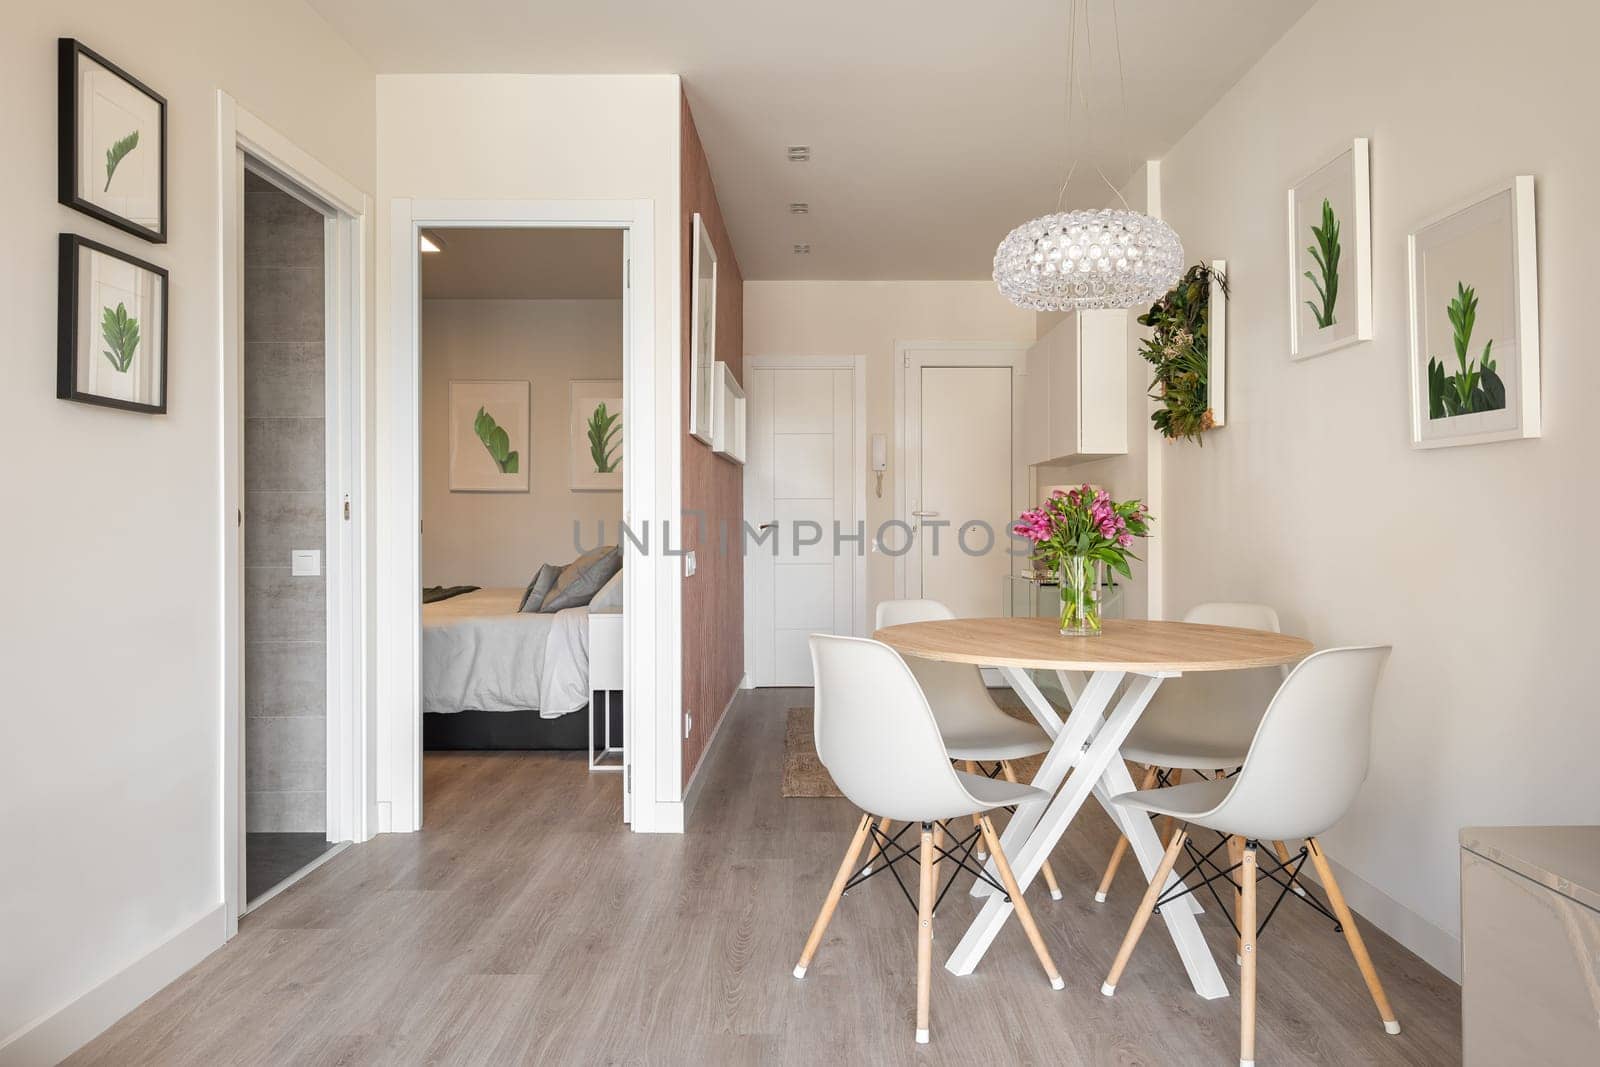 Stylish dining area in studio living room with table and chairs and decorative accessories overlooking the outdoor bathroom and bedroom. Concept of interior for a small apartment.